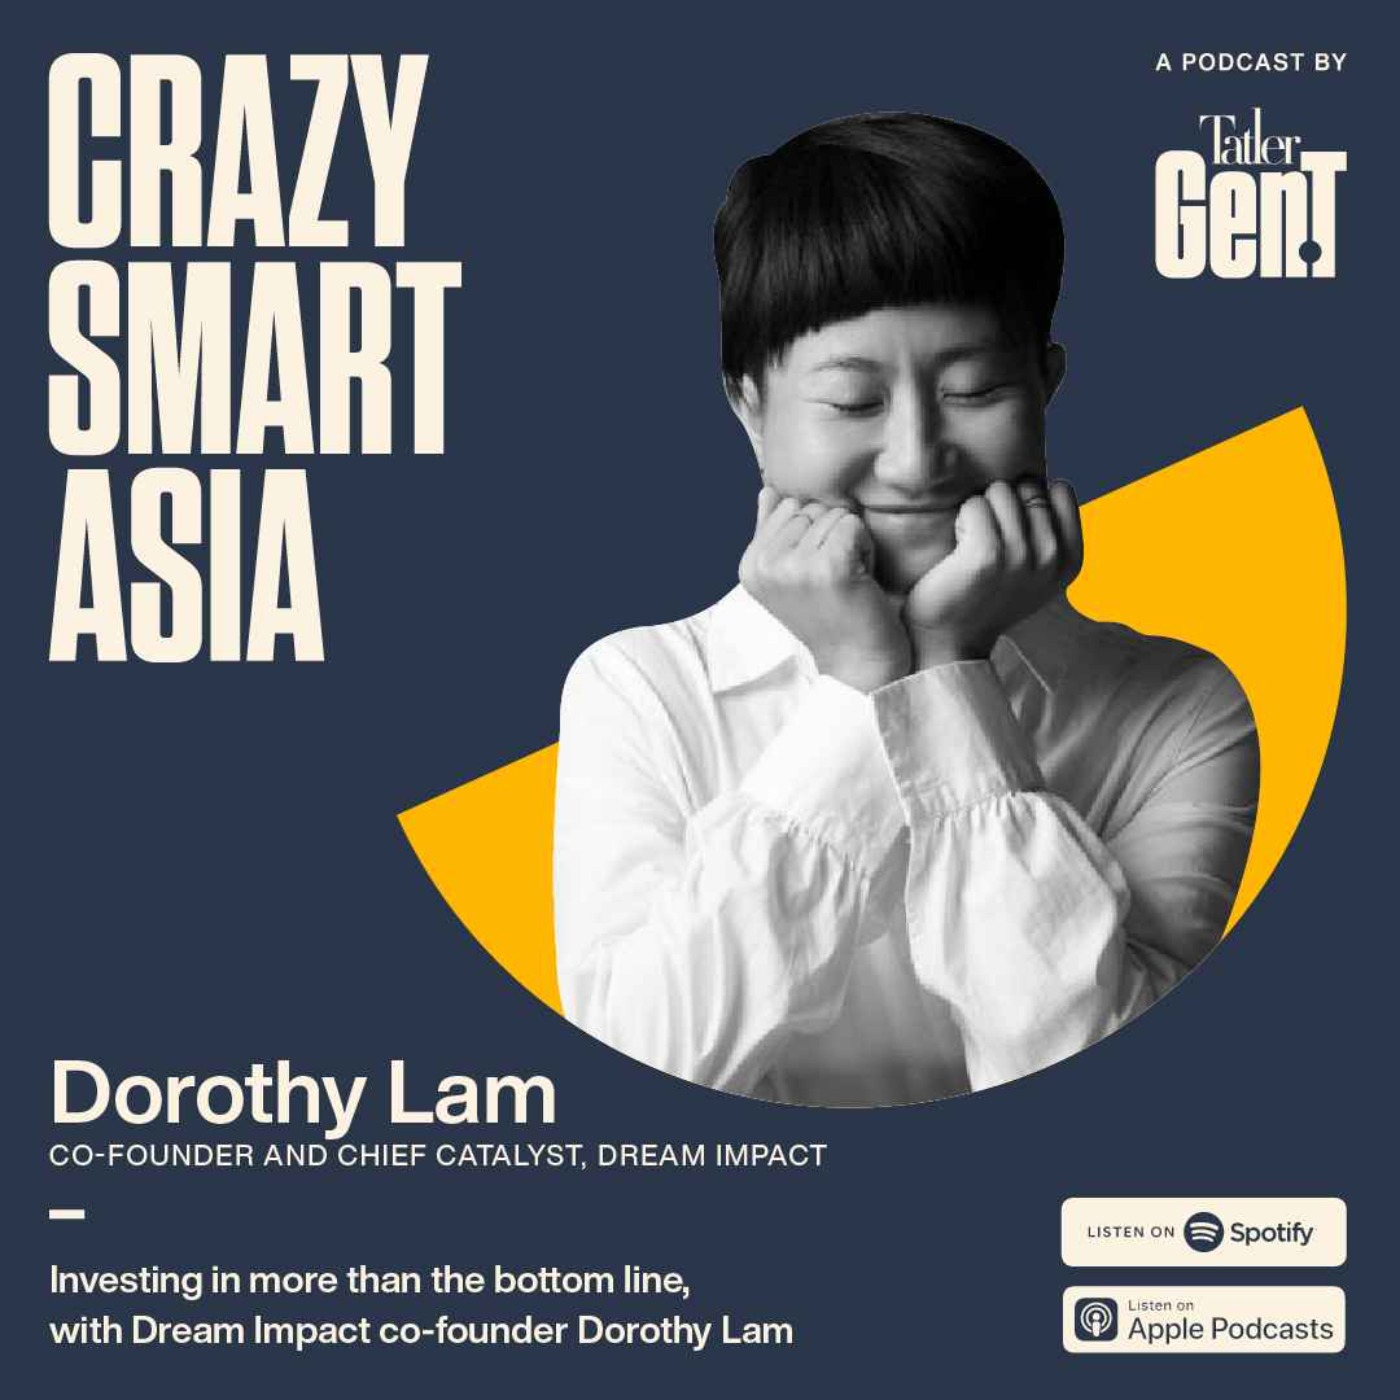 Investing in more than the bottom line, with Dream Impact co-founder Dorothy Lam